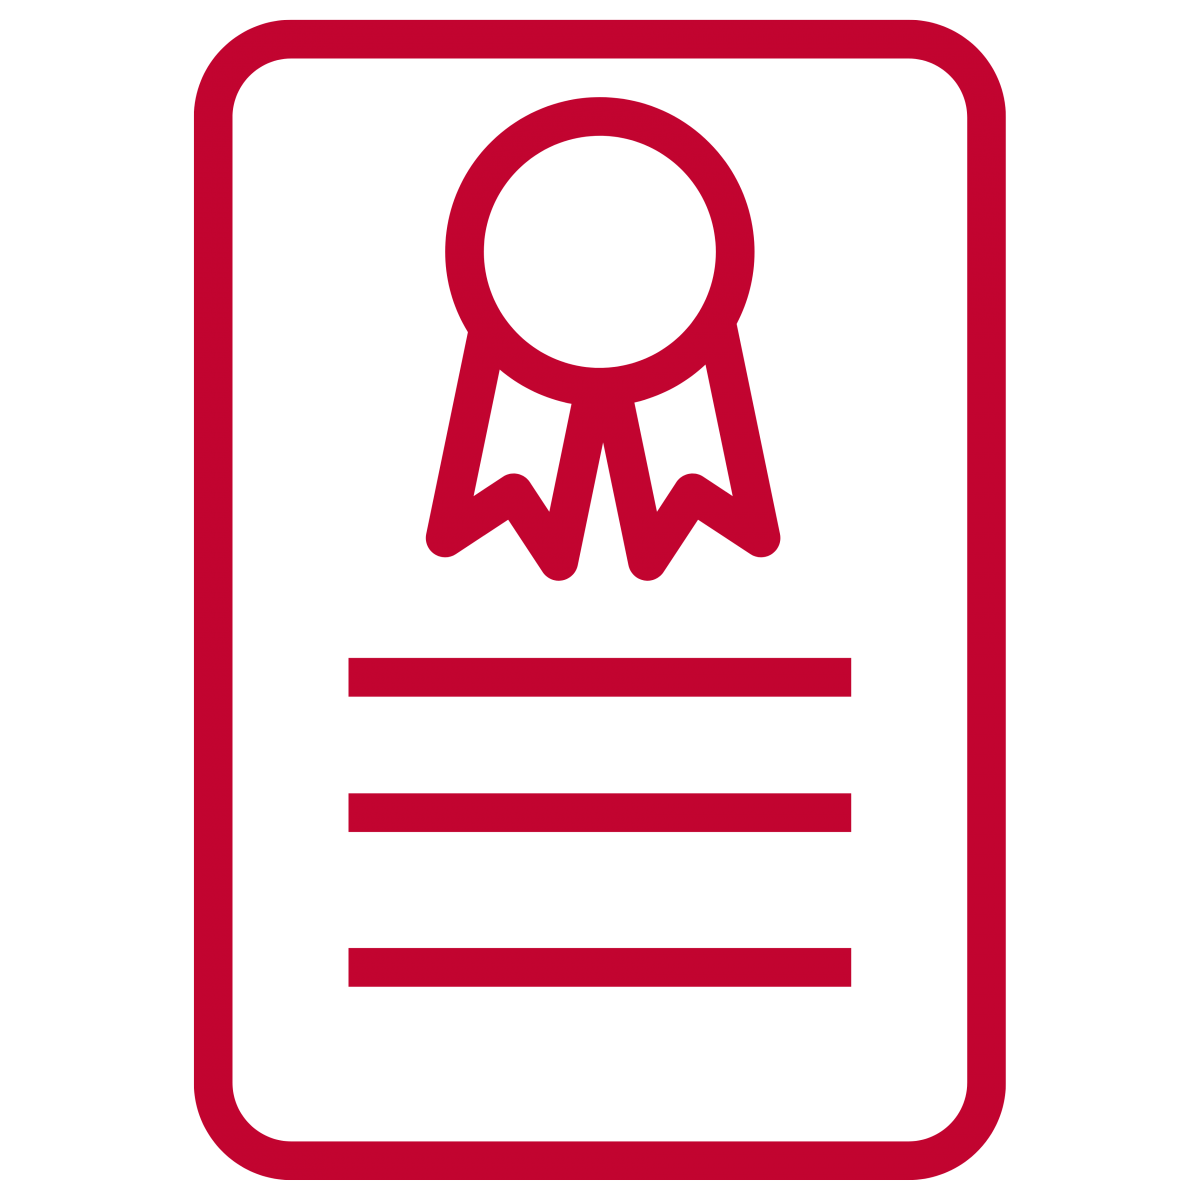 A red certificate icon